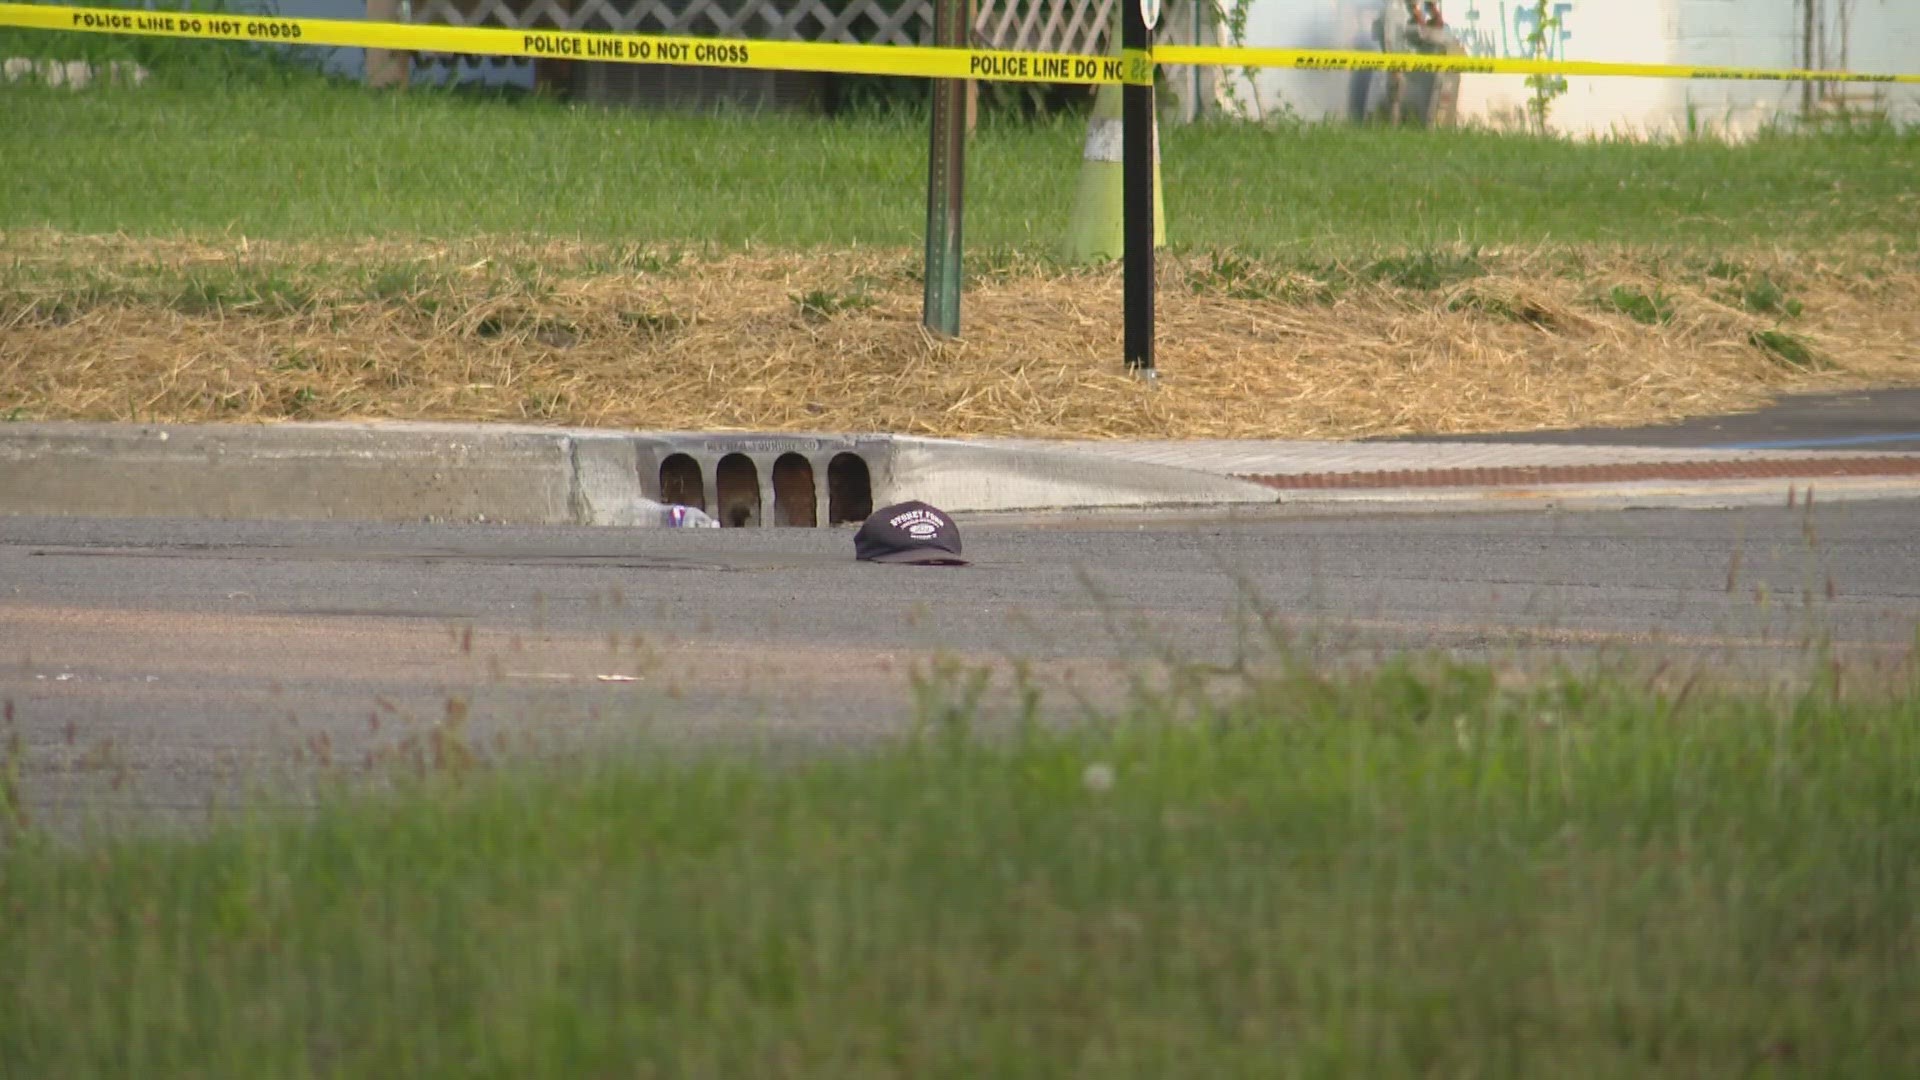 A pedestrian was struck by a vehicle on Burdsal Parkway on the north side of Indianapolis Thursday evening.